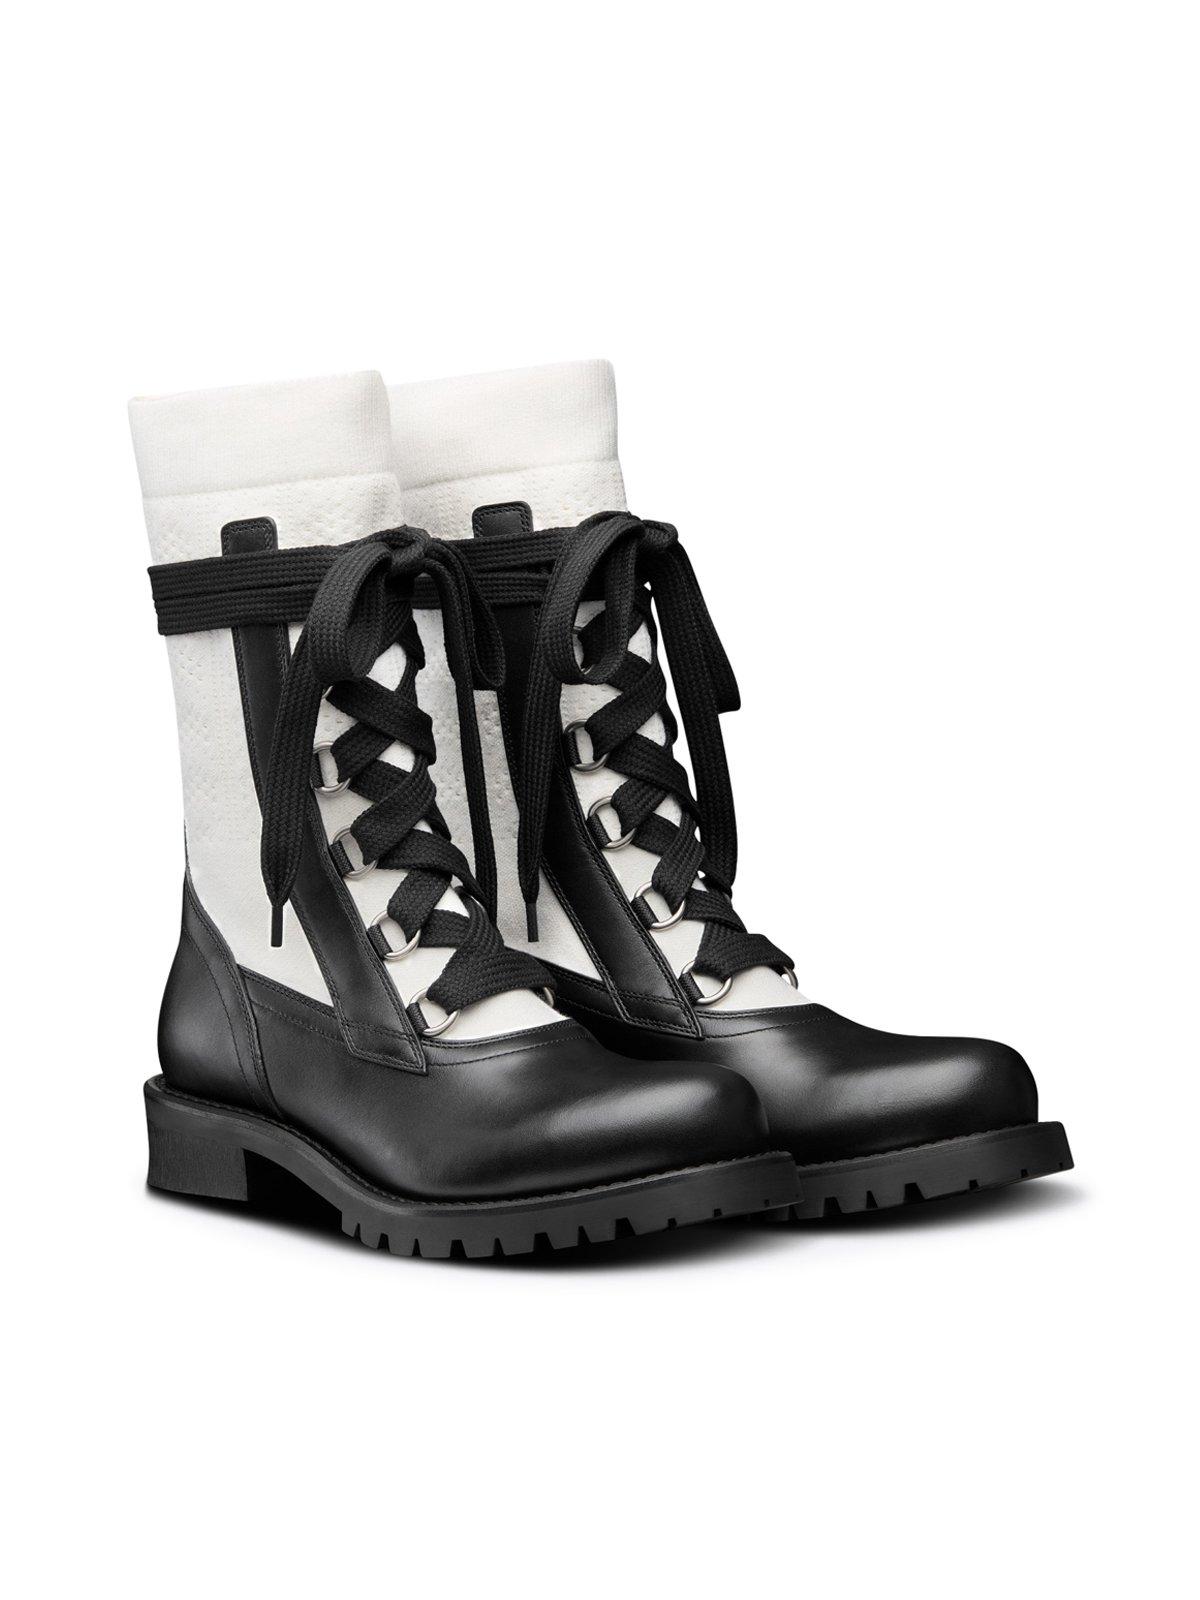 Dior Leather Diorland Lace-up Boot in Black | Lyst